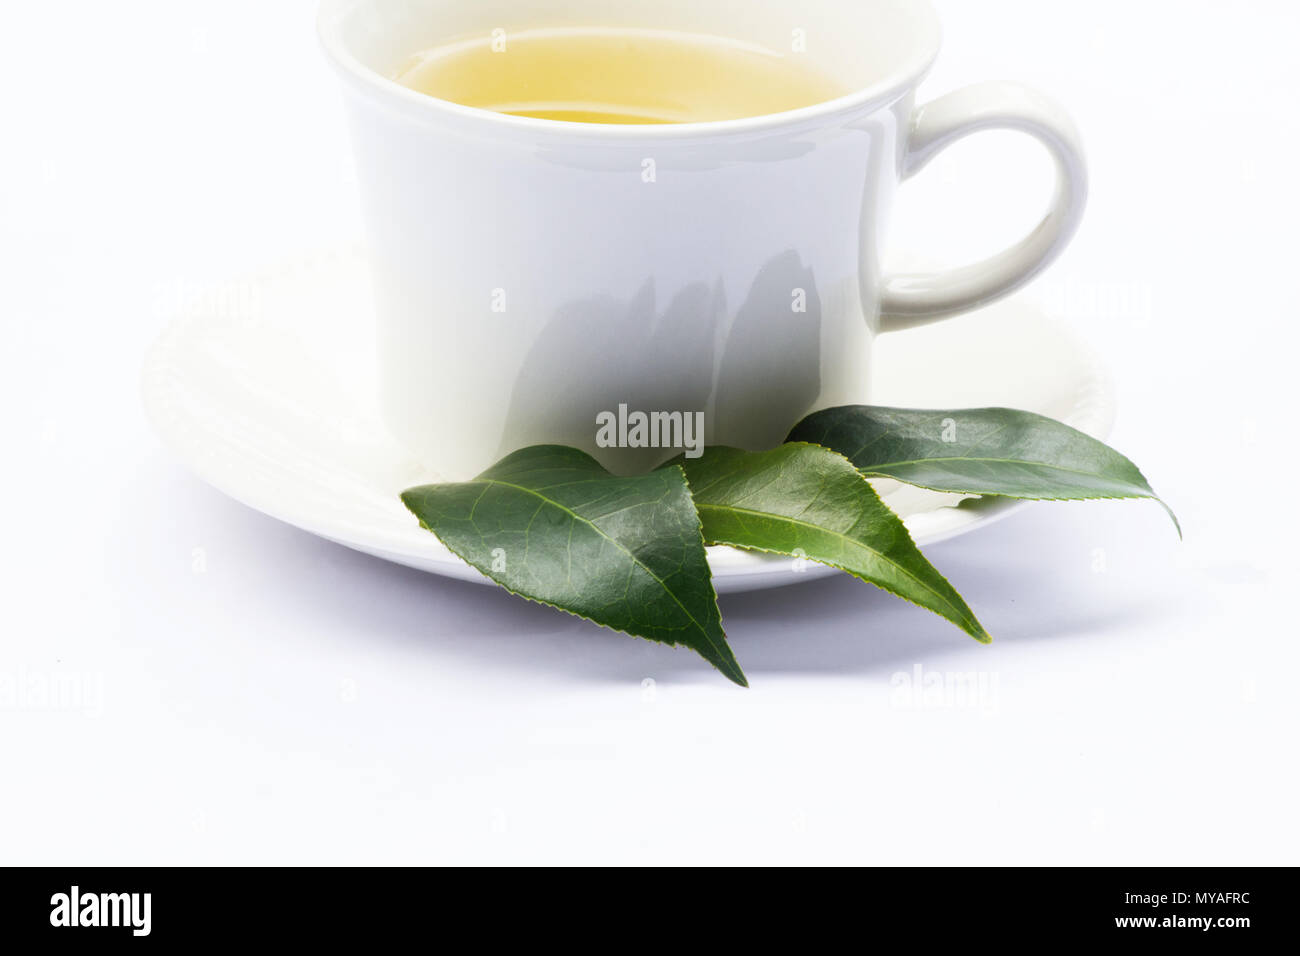 Green tea and tea plant Japanese camellia leaves on white background Stock Photo